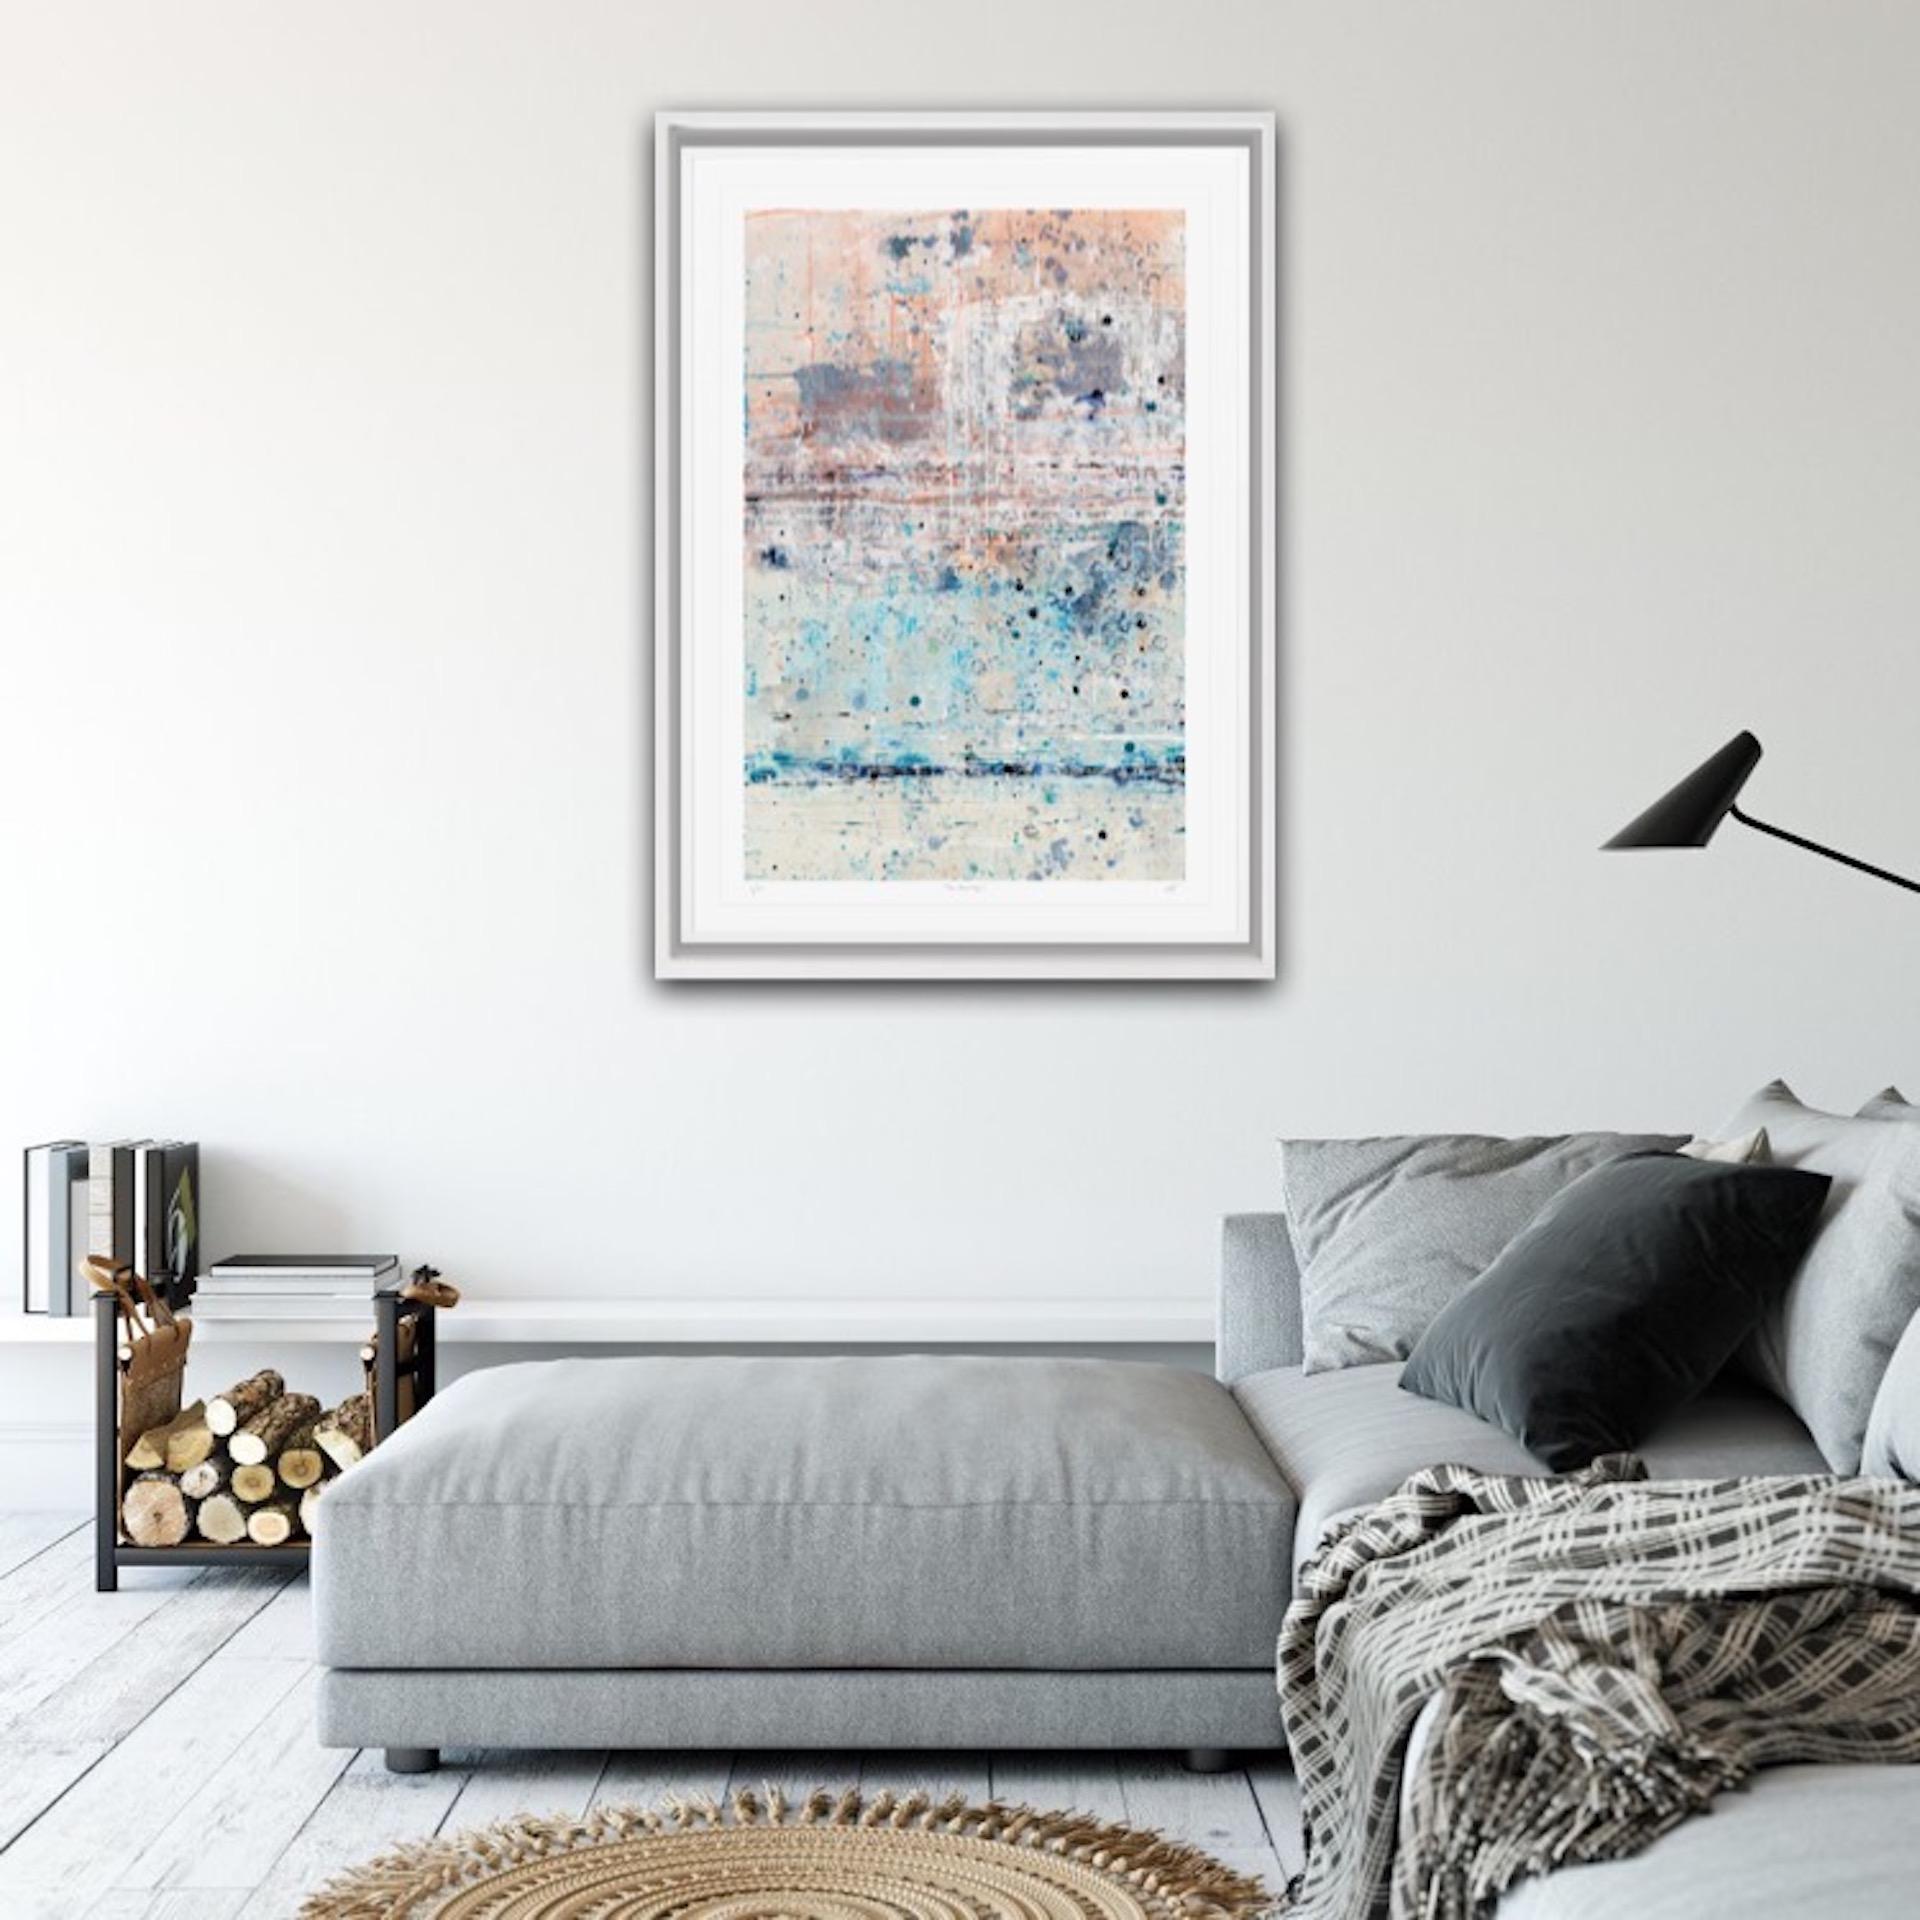 Harriet Hoult
The Hensby's
Limited Edition Giclee Print
Edition of 250
Sheet Size: H 91cm x W 63cm 
Sold Unframed
Please note that insitu images are purely an indication of how a piece may look

The Hensby’s is a limited edition print by Harriet